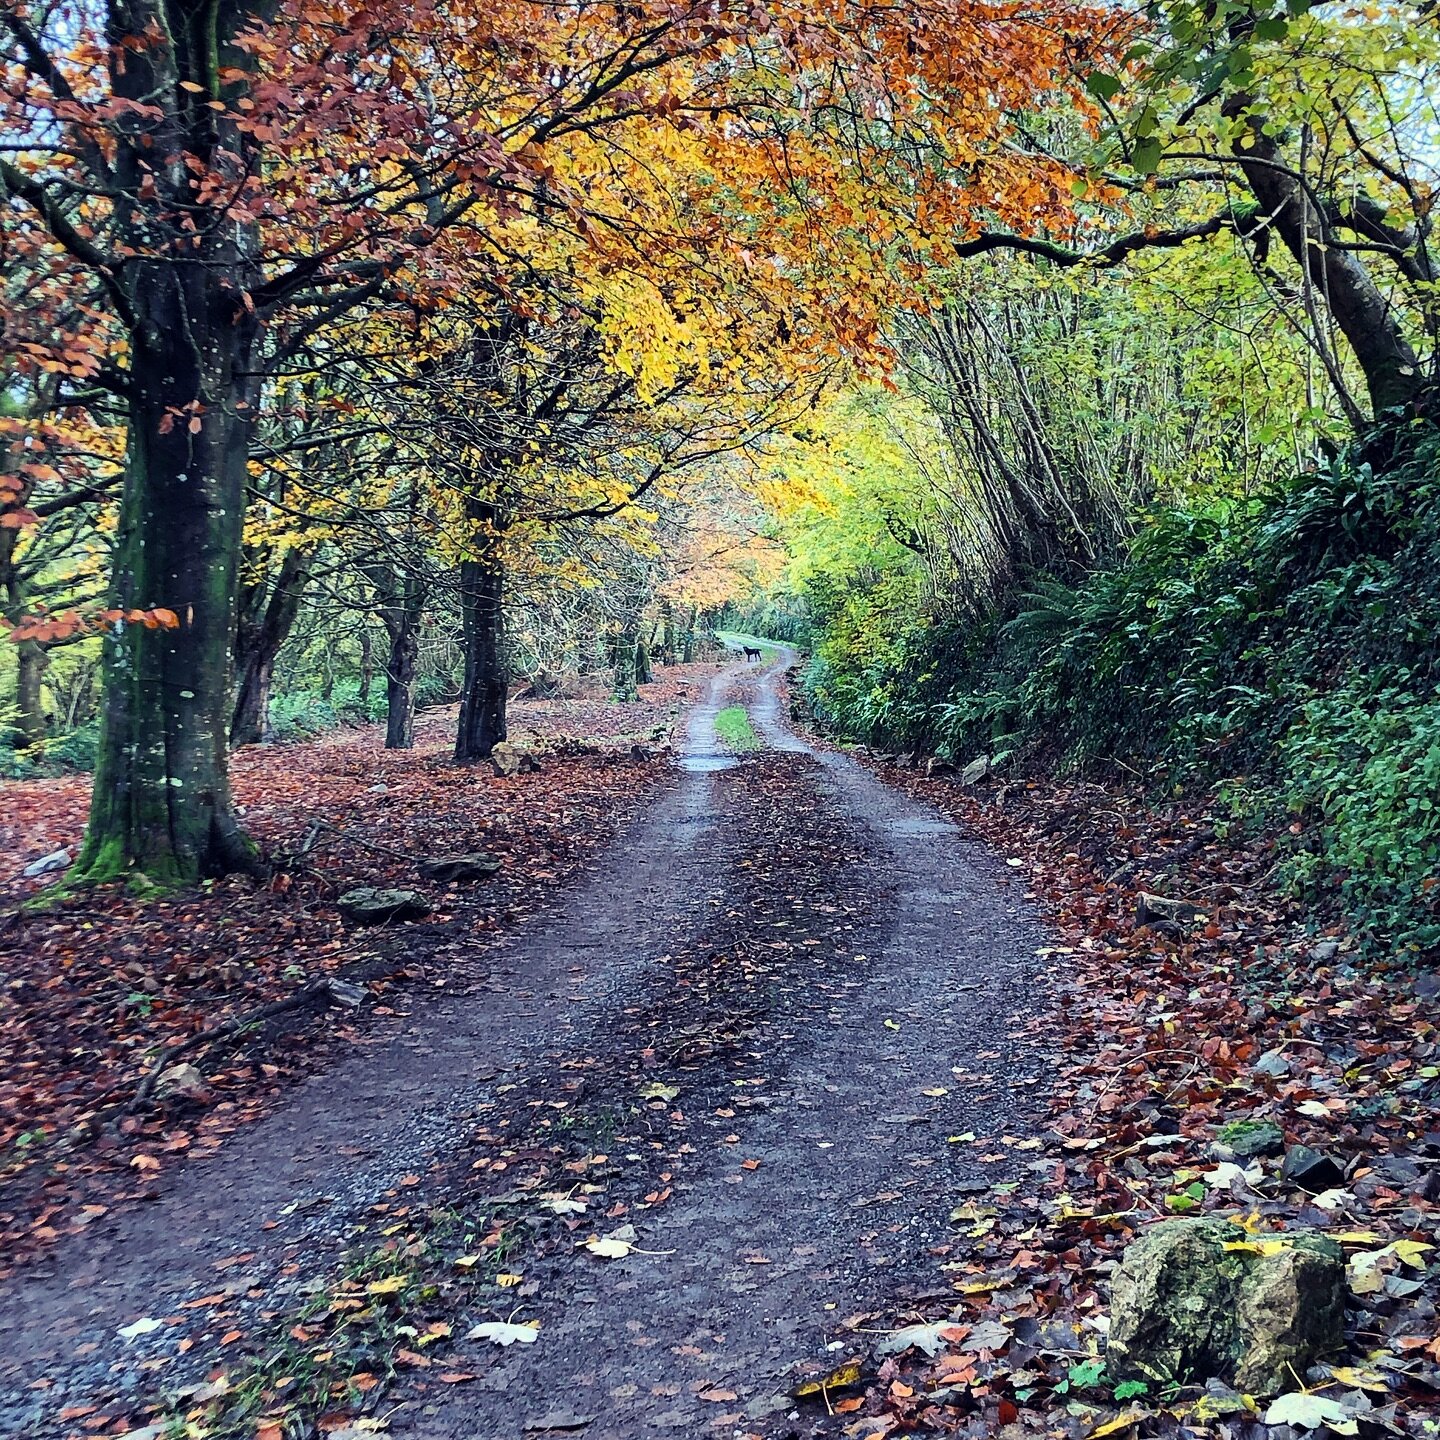 Something with 4 legs in the distance&hellip;

Someone told us today how beautiful the driveway into Hareston is, and it&rsquo;s true! Its a beautiful backdrop to repair potholes! Especially with this fading autumnal colour pallet. 

#autumnvibes🍁 #